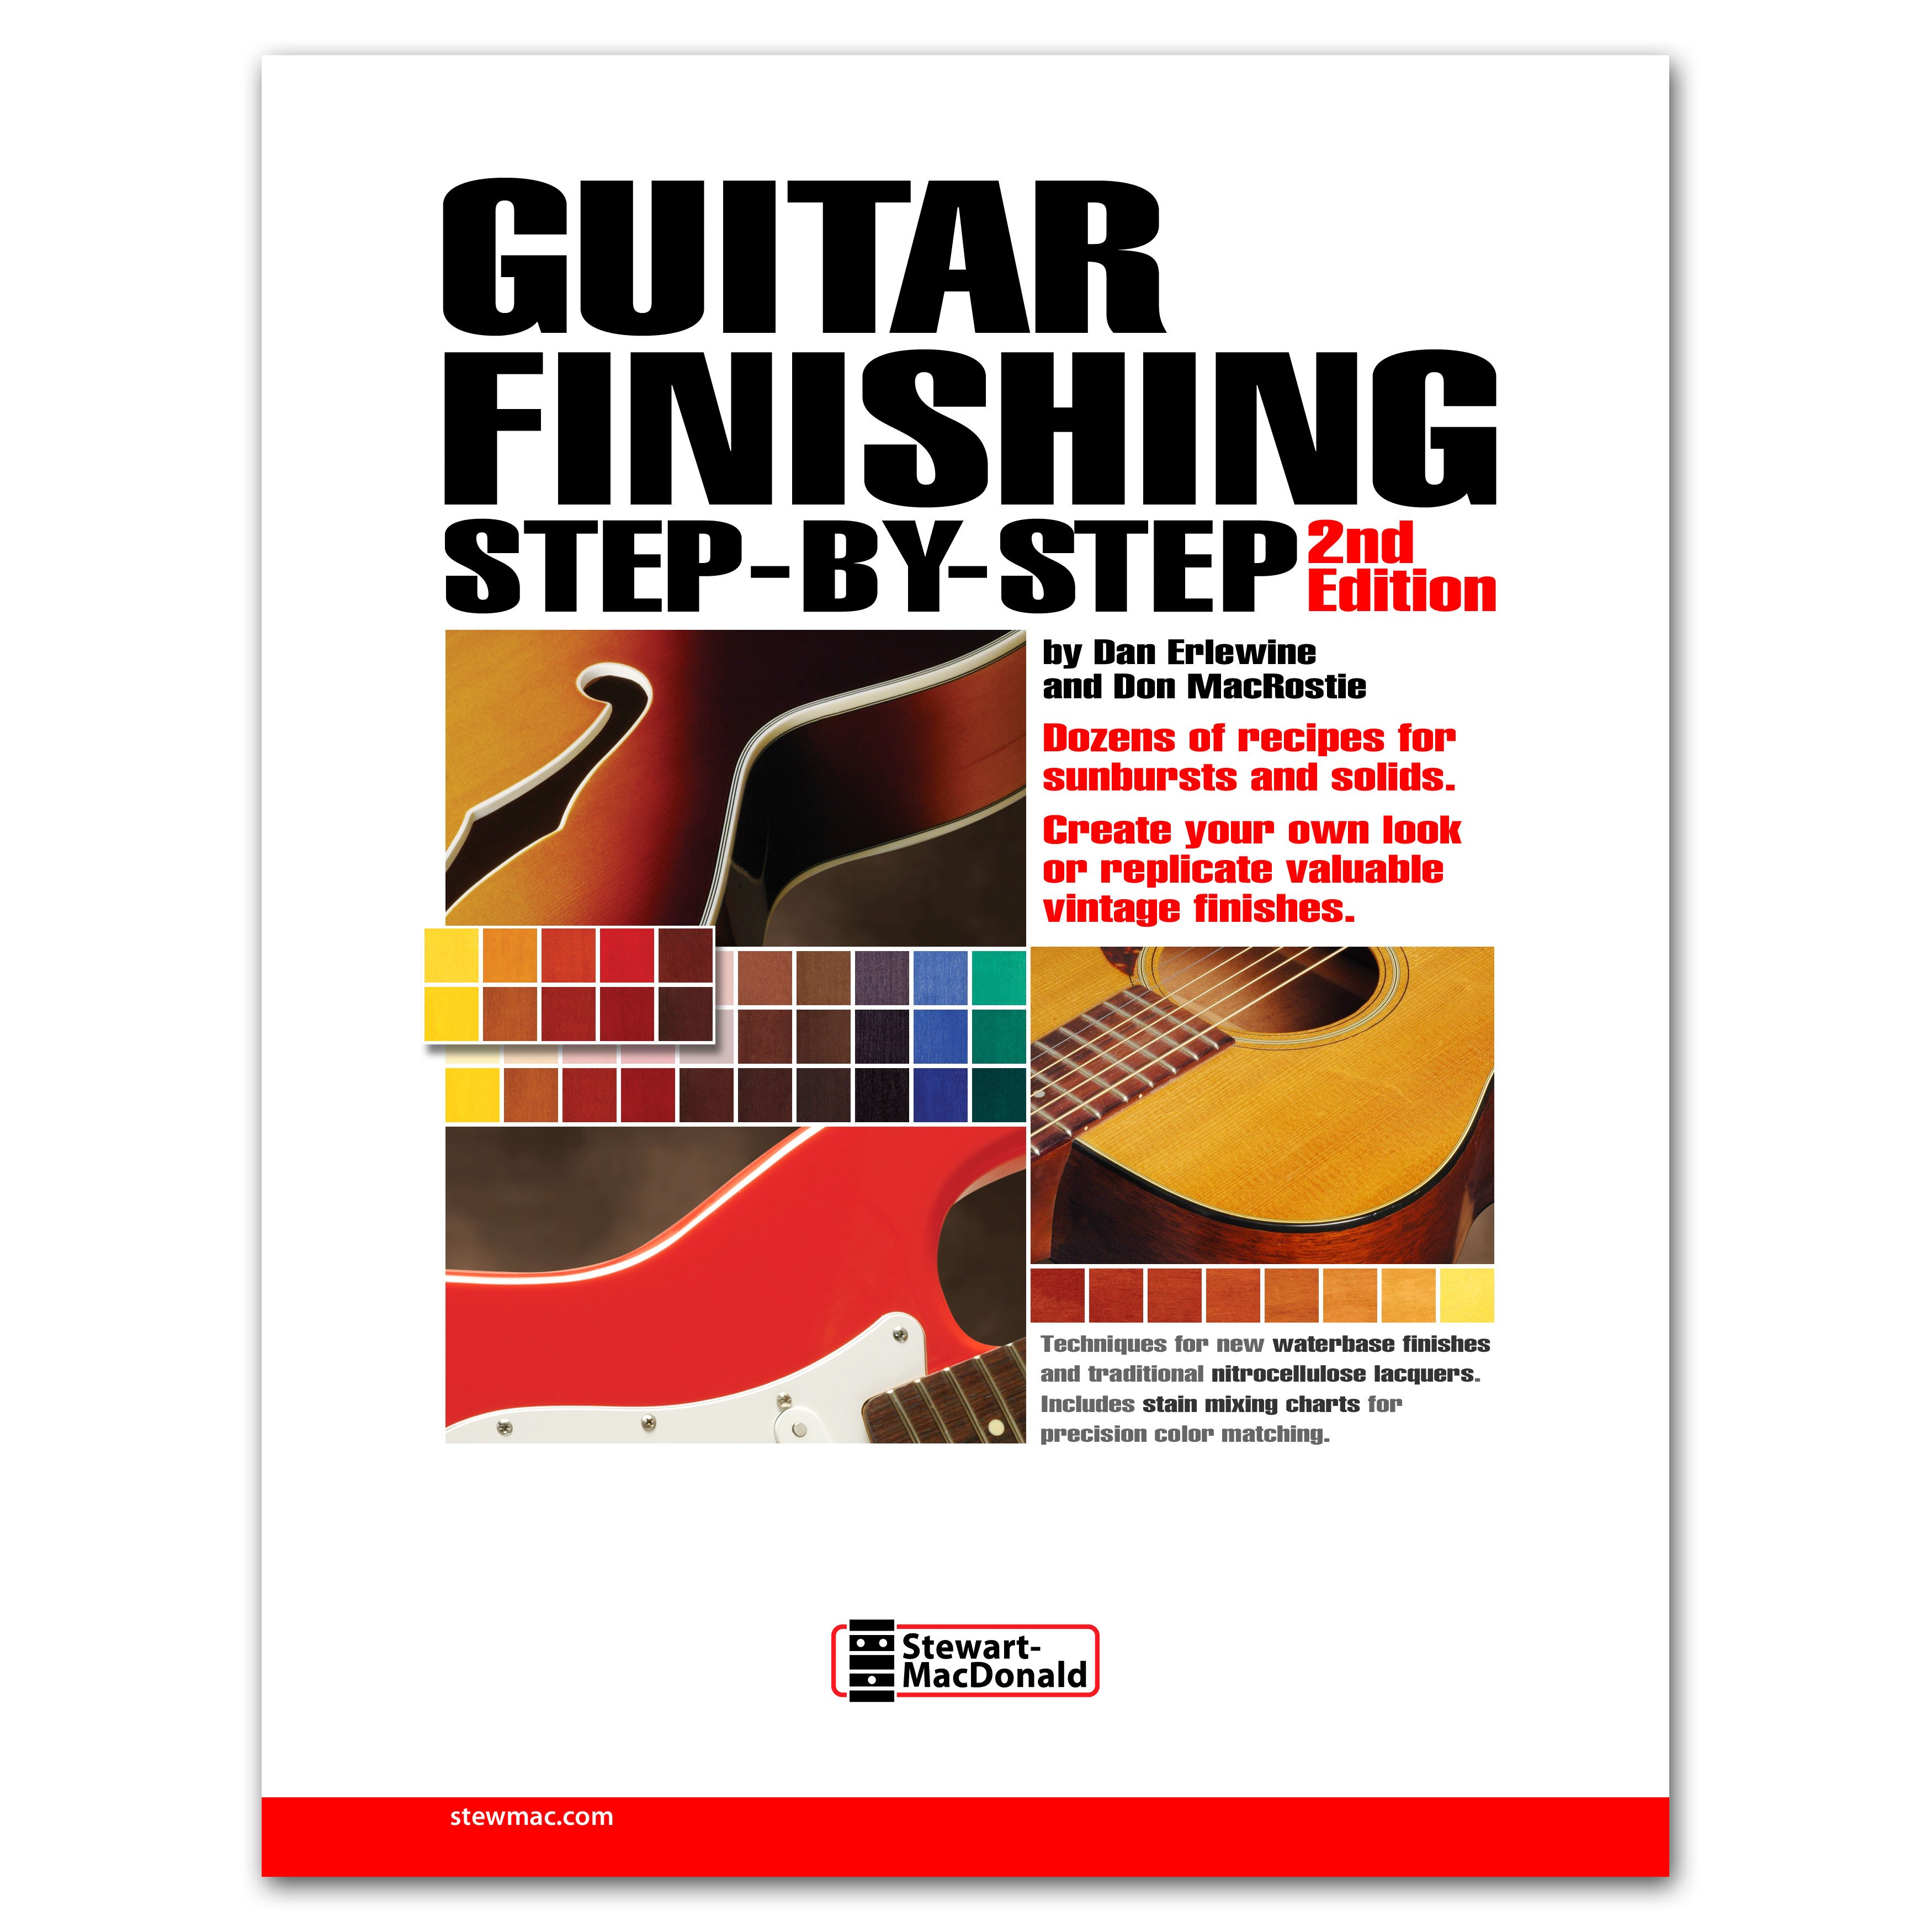 Guitar Finishing Step-By-Step